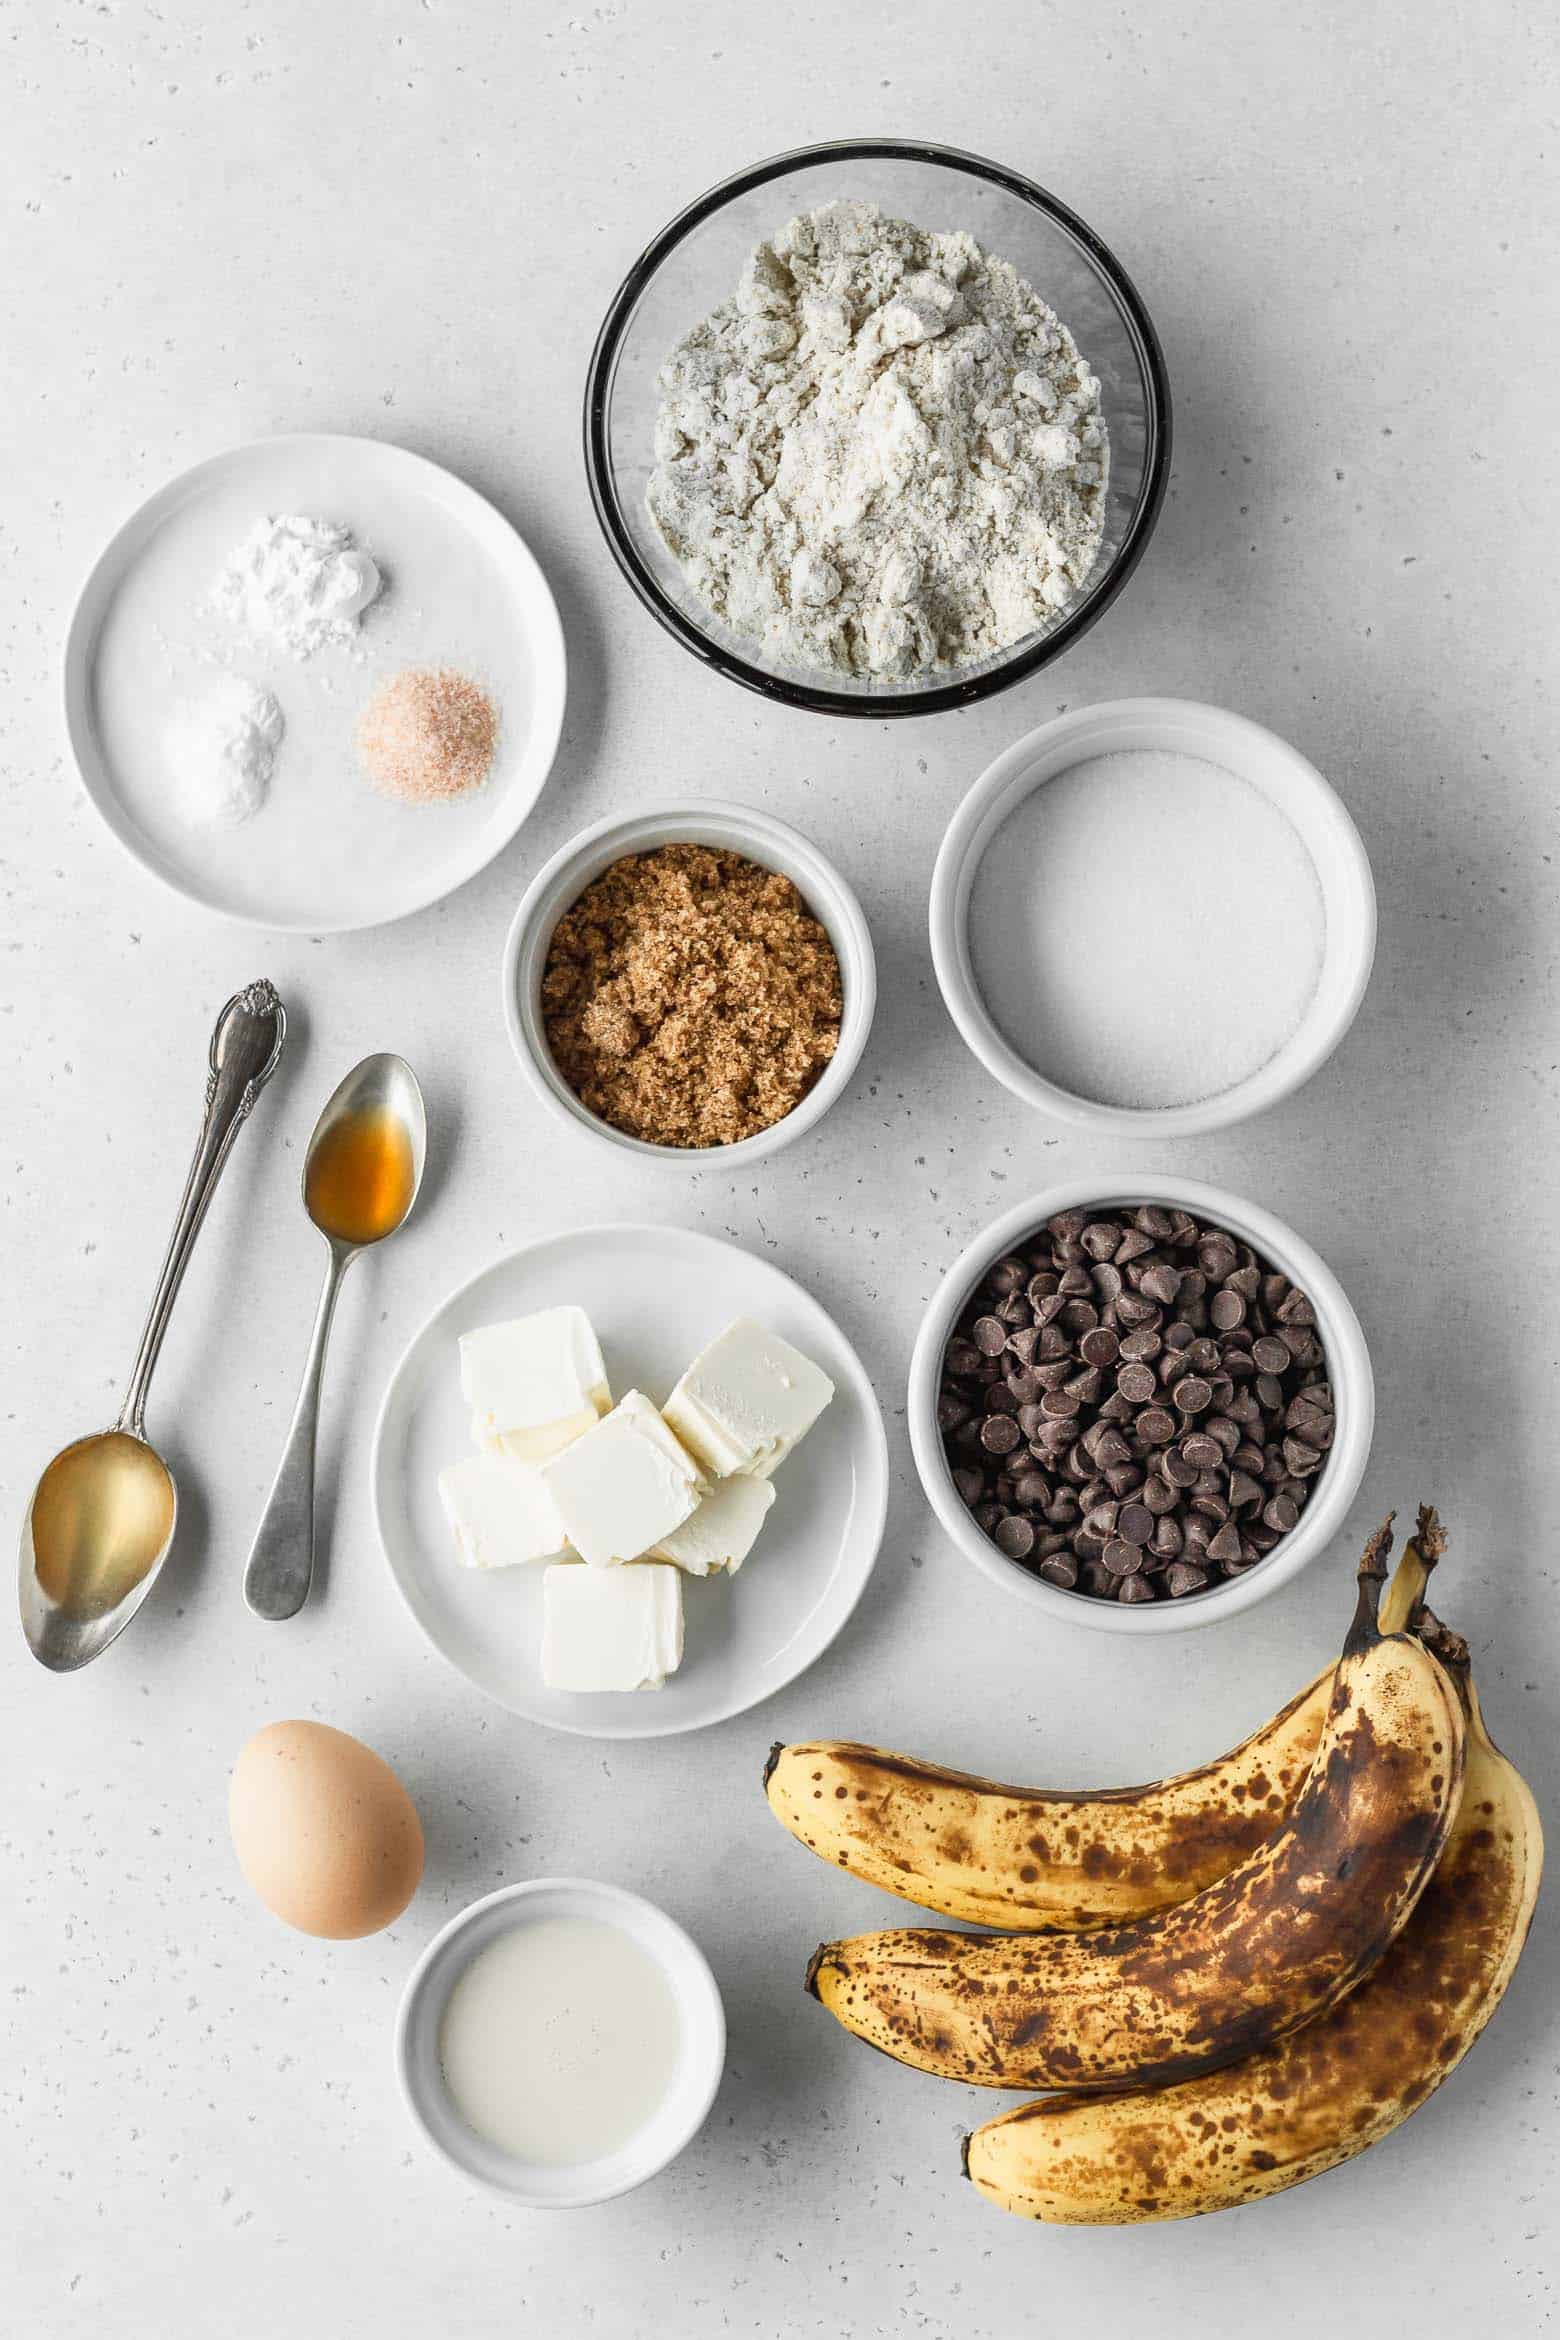 Chocolate chip banana bread ingredients